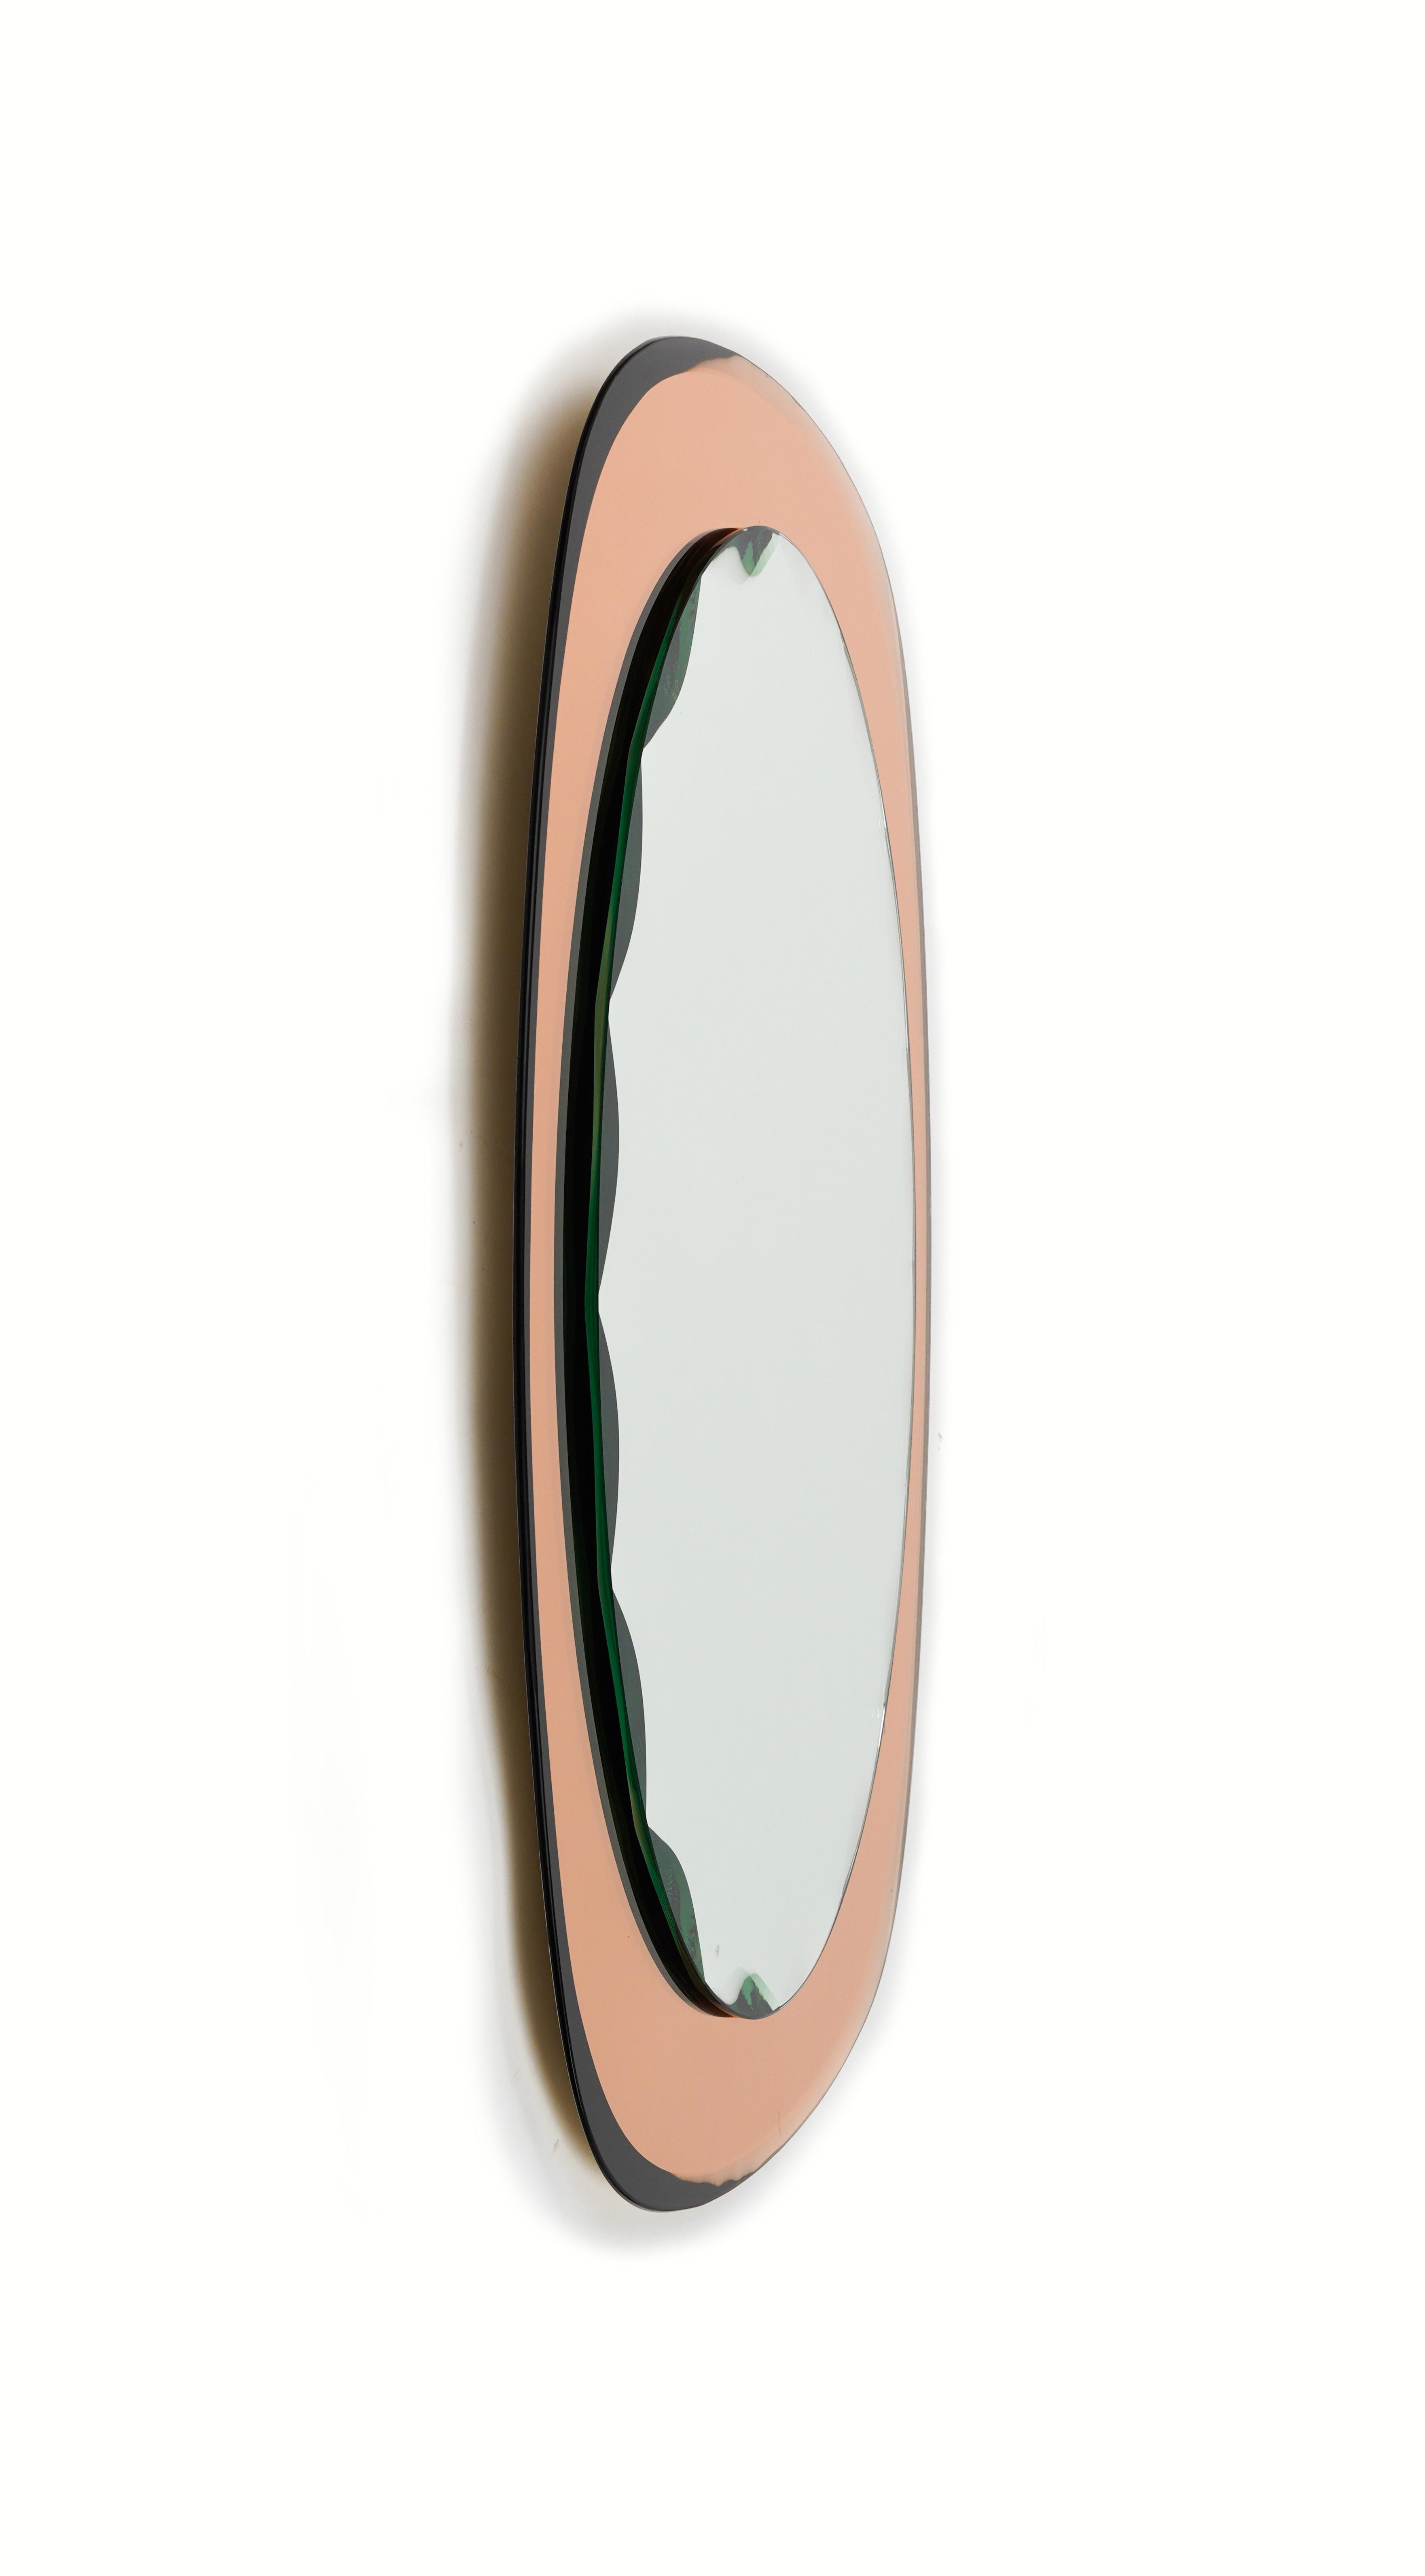 Midcentury Oval Wall Mirror rose gold Glass Frame by Cristal Arte, Italy 1960s In Good Condition For Sale In Rome, IT